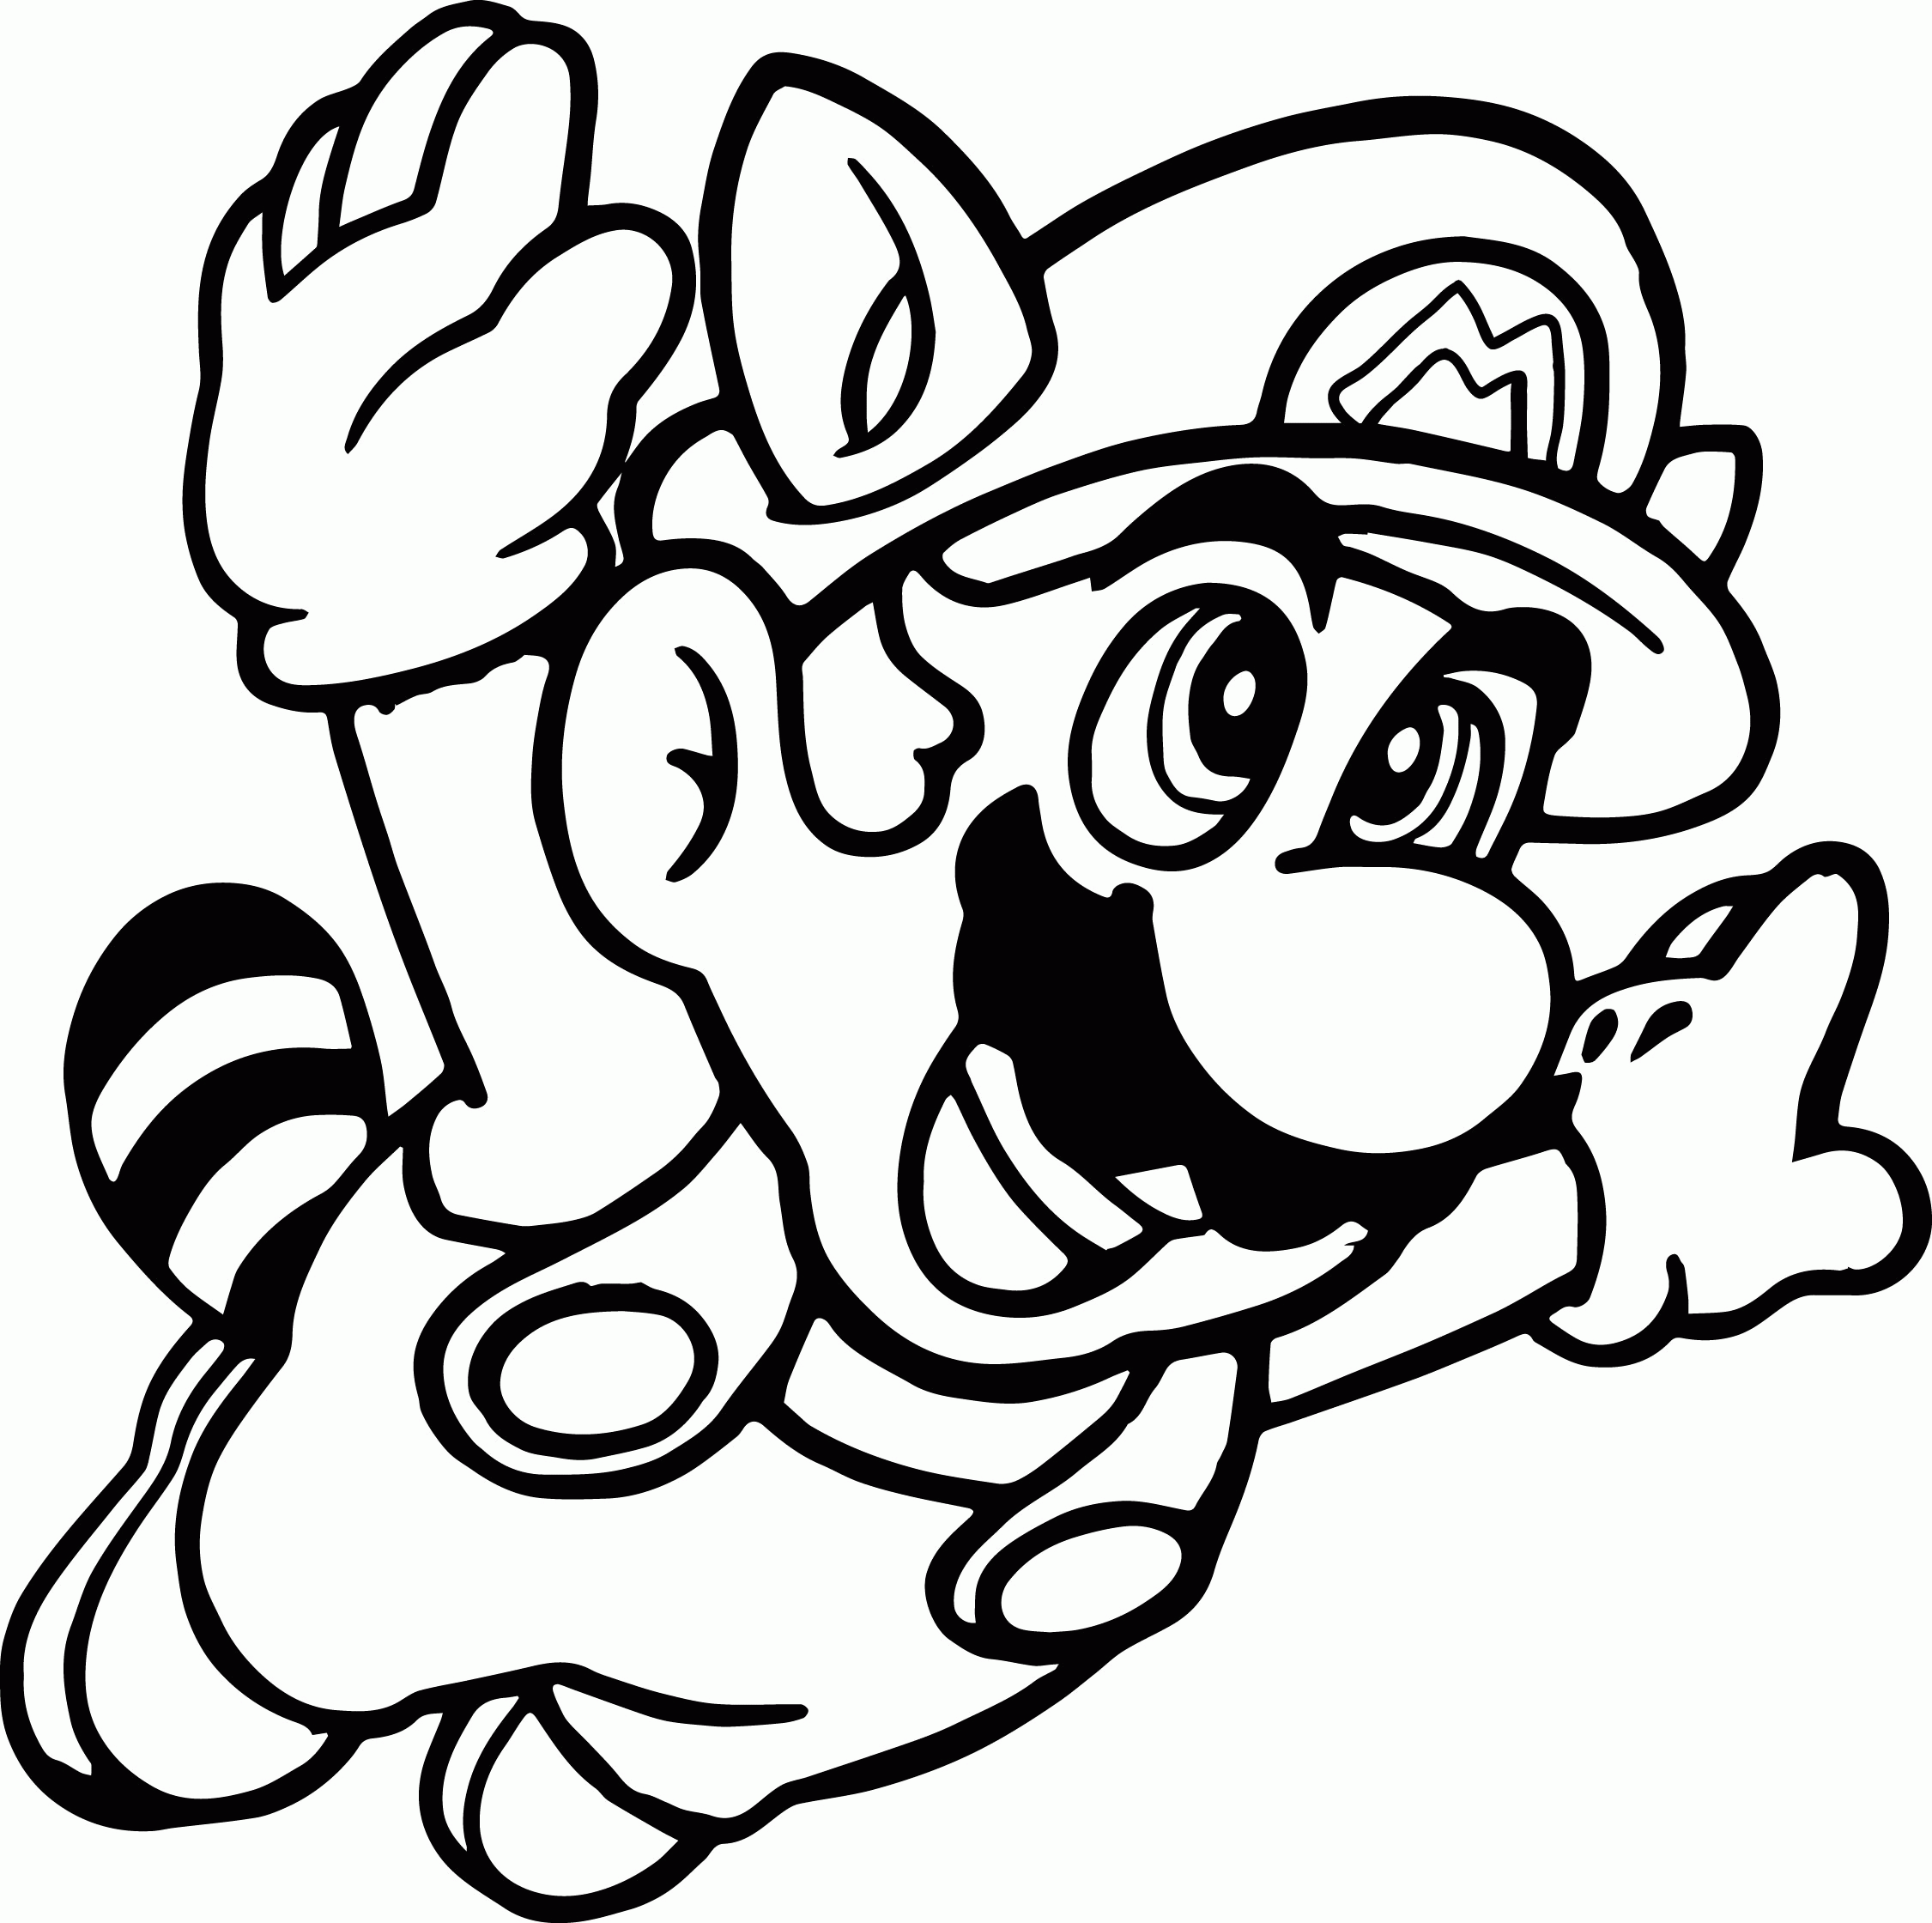 Clip Arts Related To : birthday mario black and white. view all Toad Colo.....